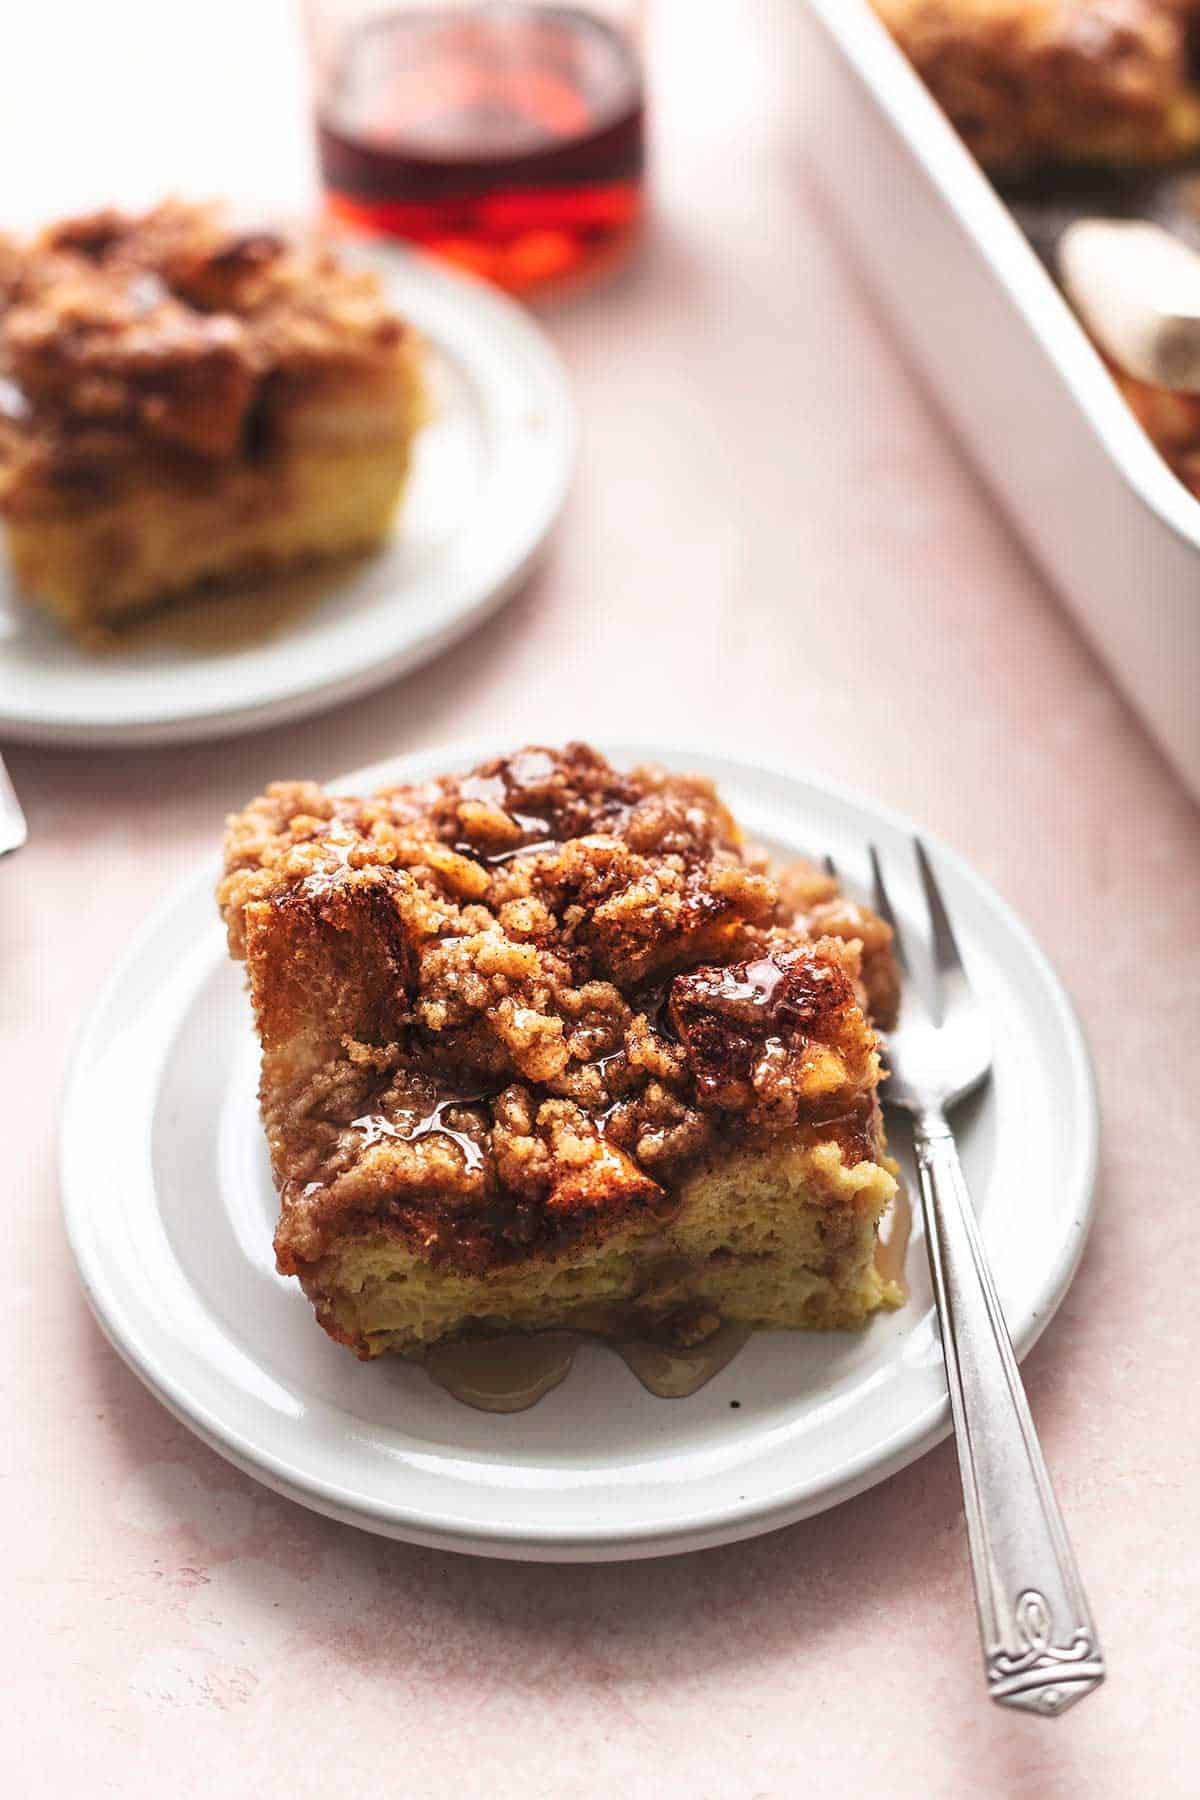 a piece of French toast casserole with a fork on a plate with another piece of casserole, a bottle of syrup and a baking pan of casserole in the background.